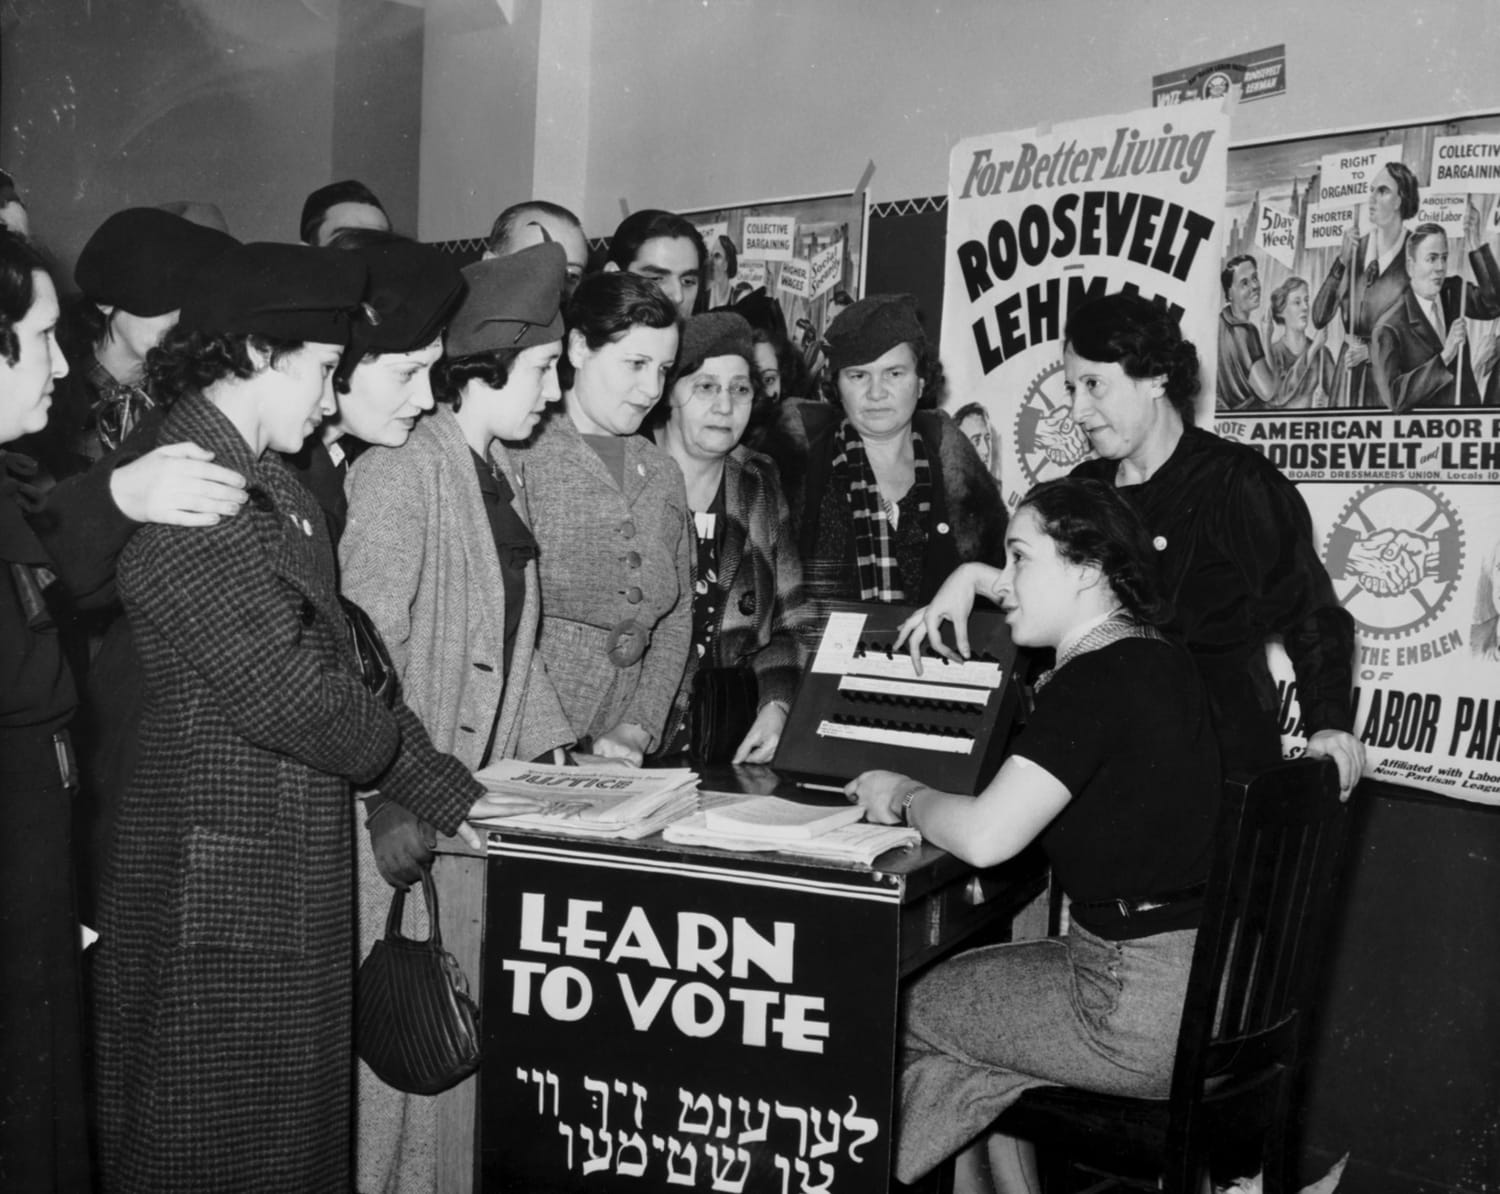 Women from the American Labor Party showing other women how to vote. New York, 1936.